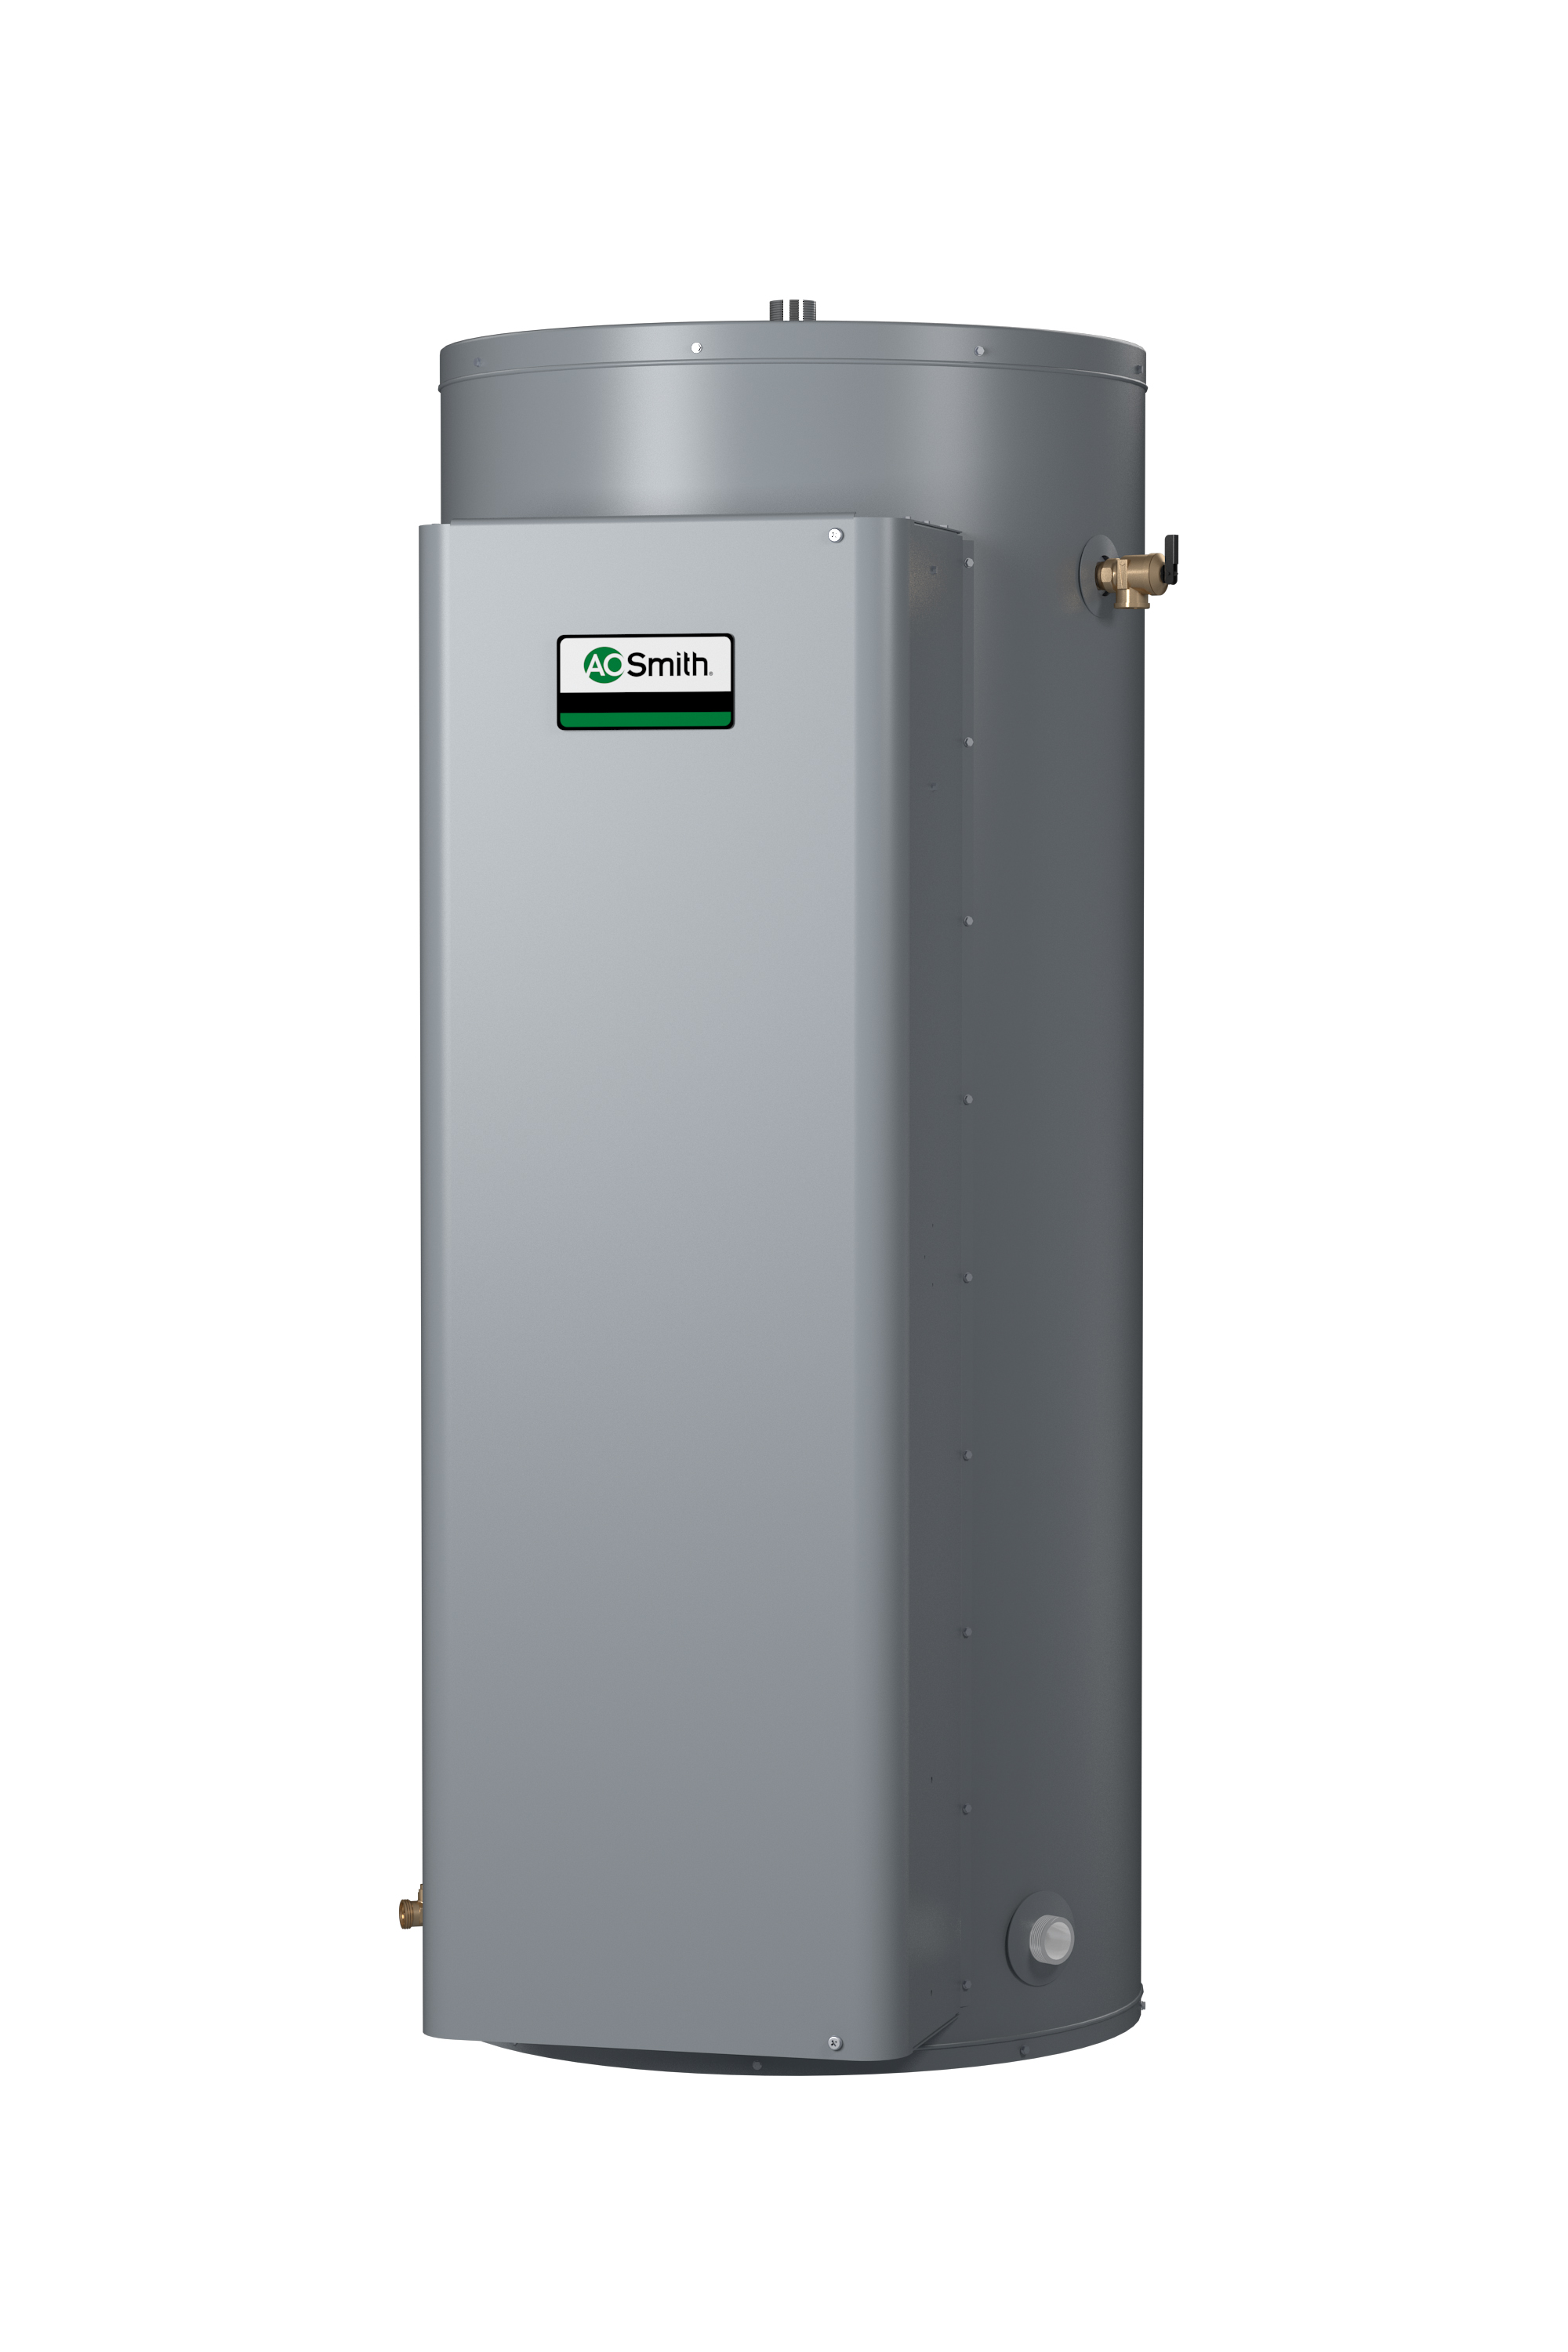 AO SMITH DRE-120-13.5, 119 GALLON, 13.5KW, 480 VOLT, 16.25 AMPS, 3 PHASE, 3 ELEMENT, COMMERCIAL ELECTRIC WATER HEATER, GOLD SERIES